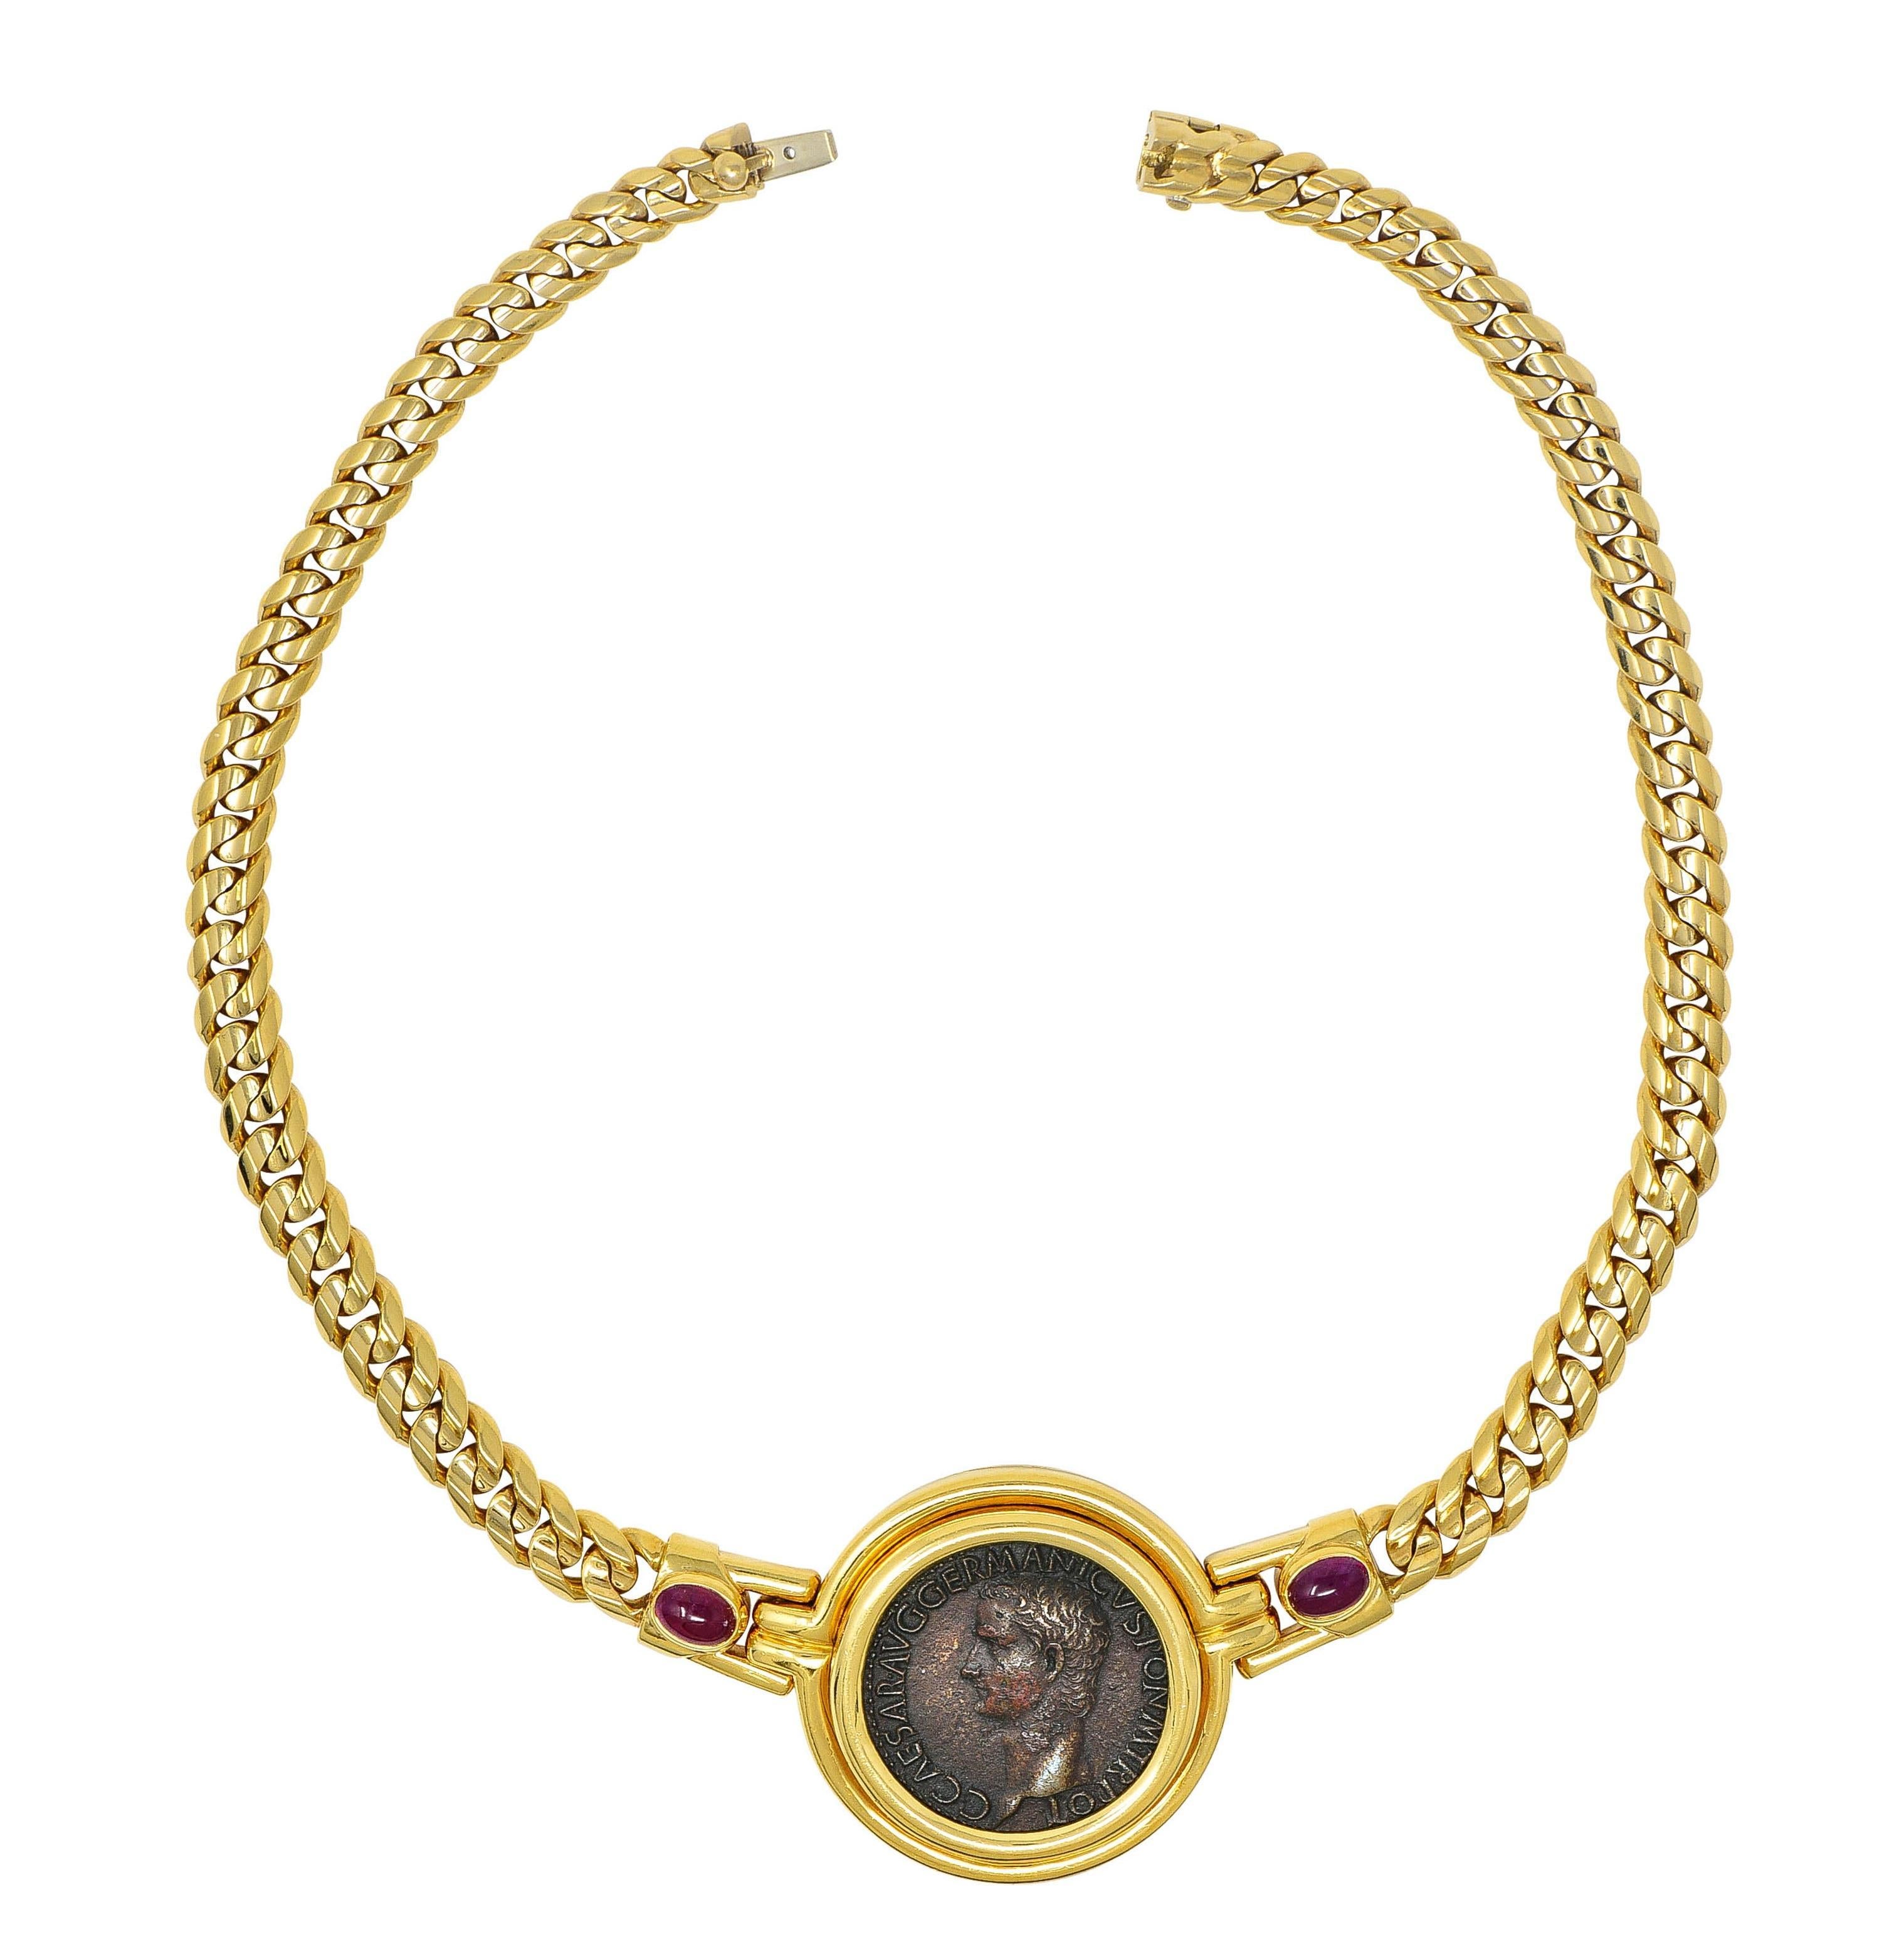 Comprised of curb link chain centering an ancient coin bezel set in hinged station
Measuring 25.0 mm round - deep matte brownish bronze with antique patina
Depicting a cameo bust of the ancient Roman emperor Caligula in profile 
Reverse depicts the